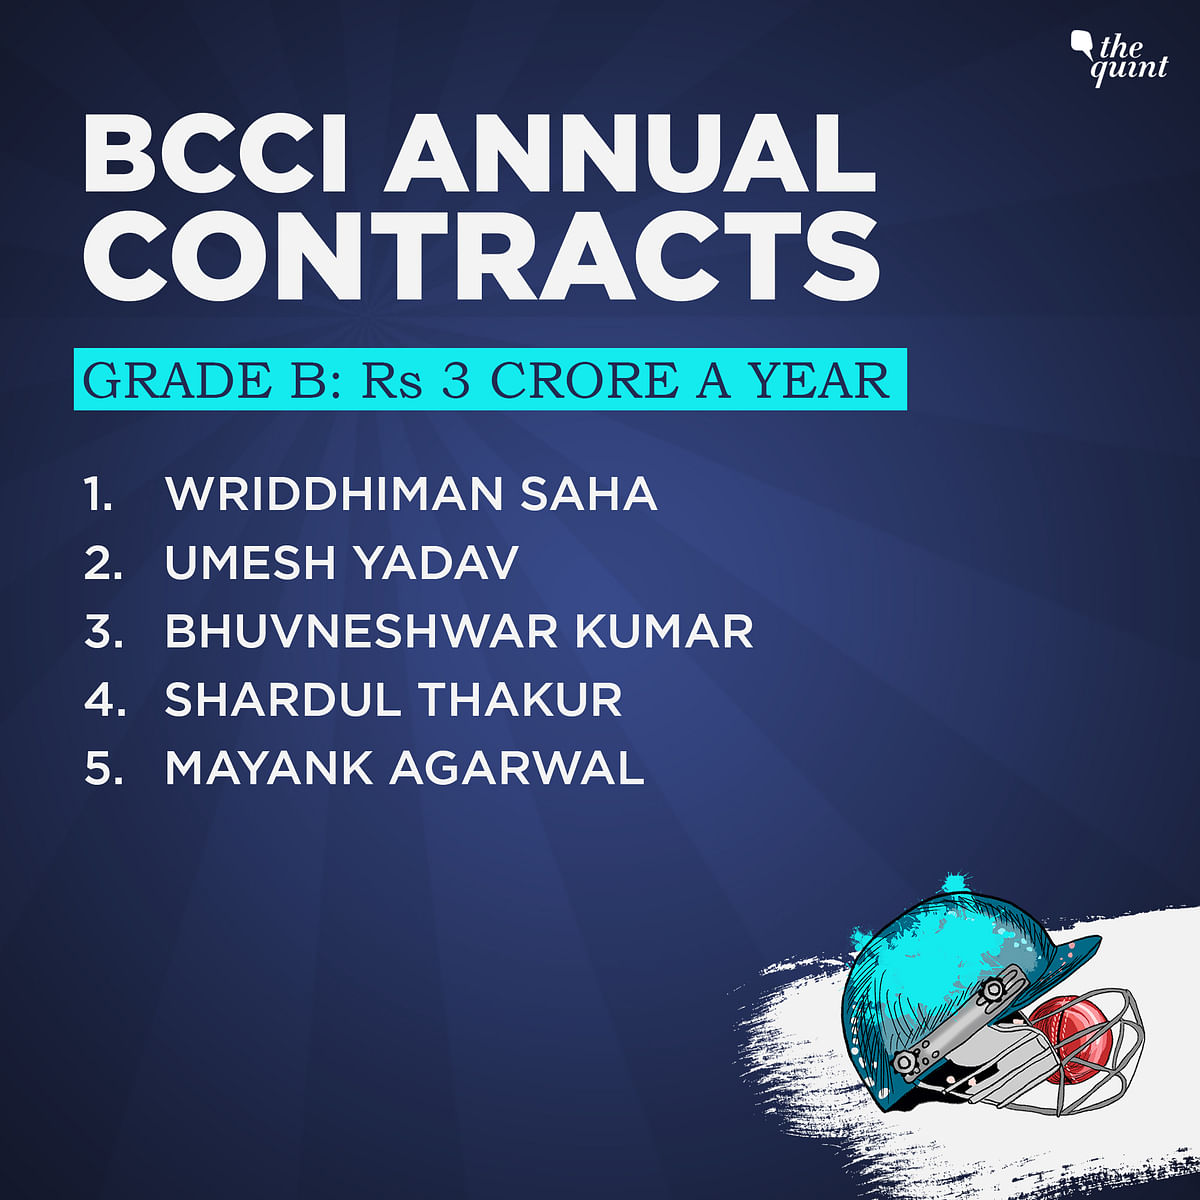 Virat Kohli and Rohit Sharma along with Jasprit Bumrah will earn Rs 7 crore a year as their BCCI salary.